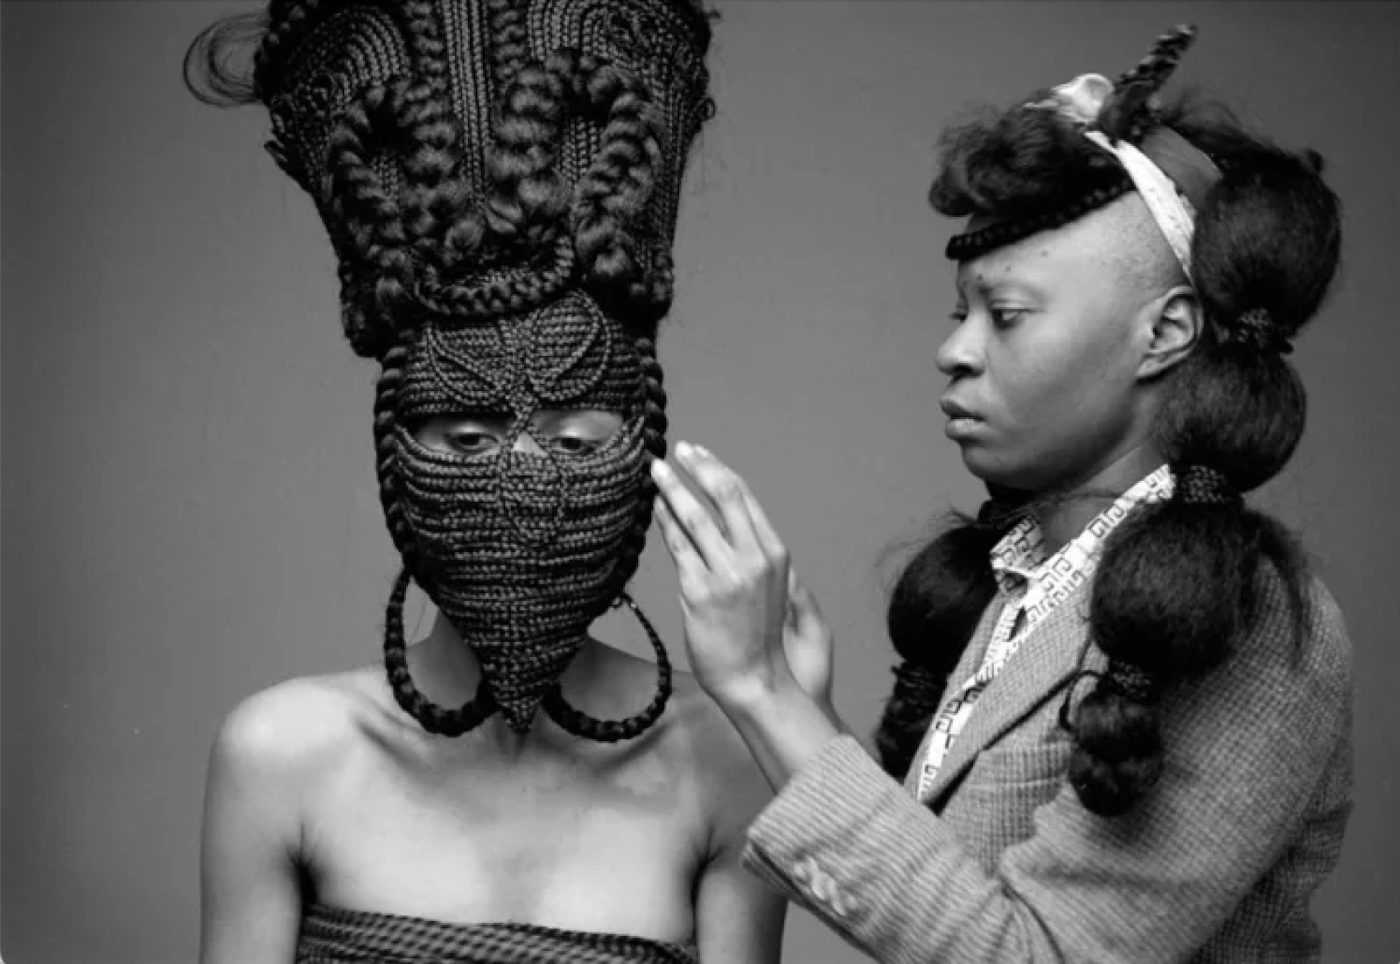 Joanne Petit Frere working with a model, in 2012. Photo by Delphine Diaw Diallo